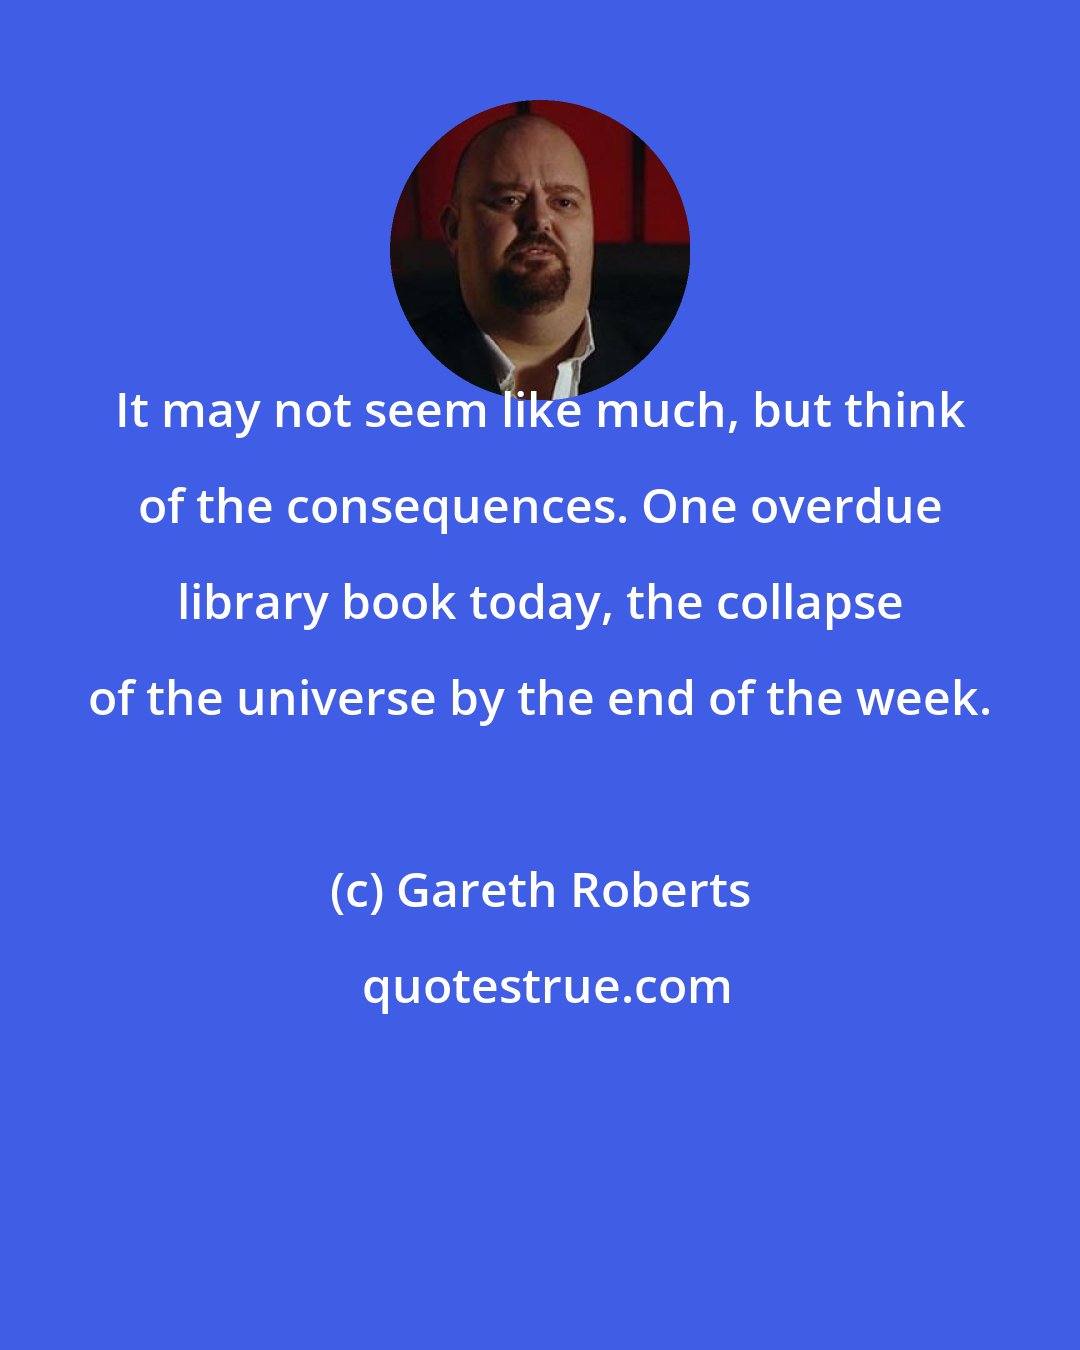 Gareth Roberts: It may not seem like much, but think of the consequences. One overdue library book today, the collapse of the universe by the end of the week.